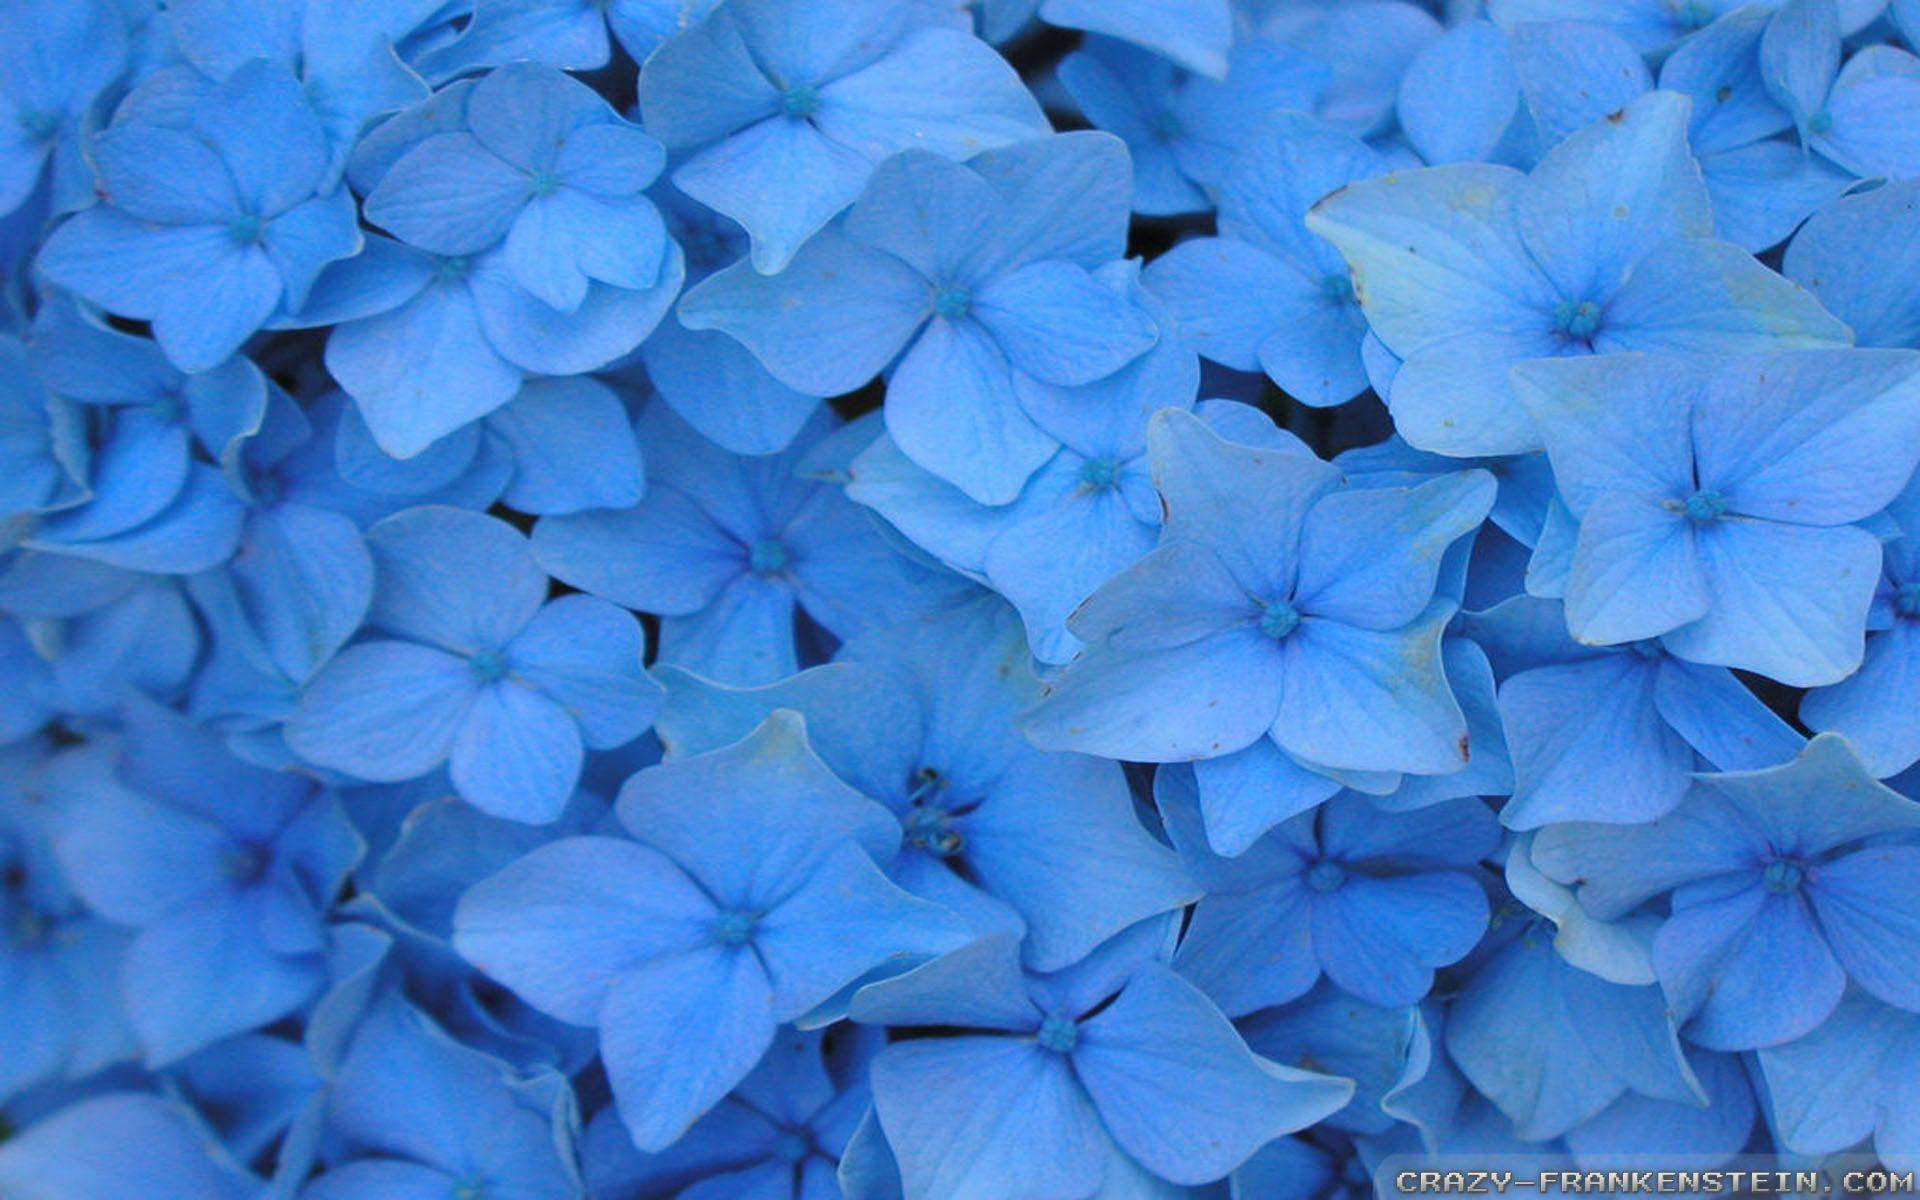 15 Greatest blue flower desktop wallpaper You Can Use It For Free ...